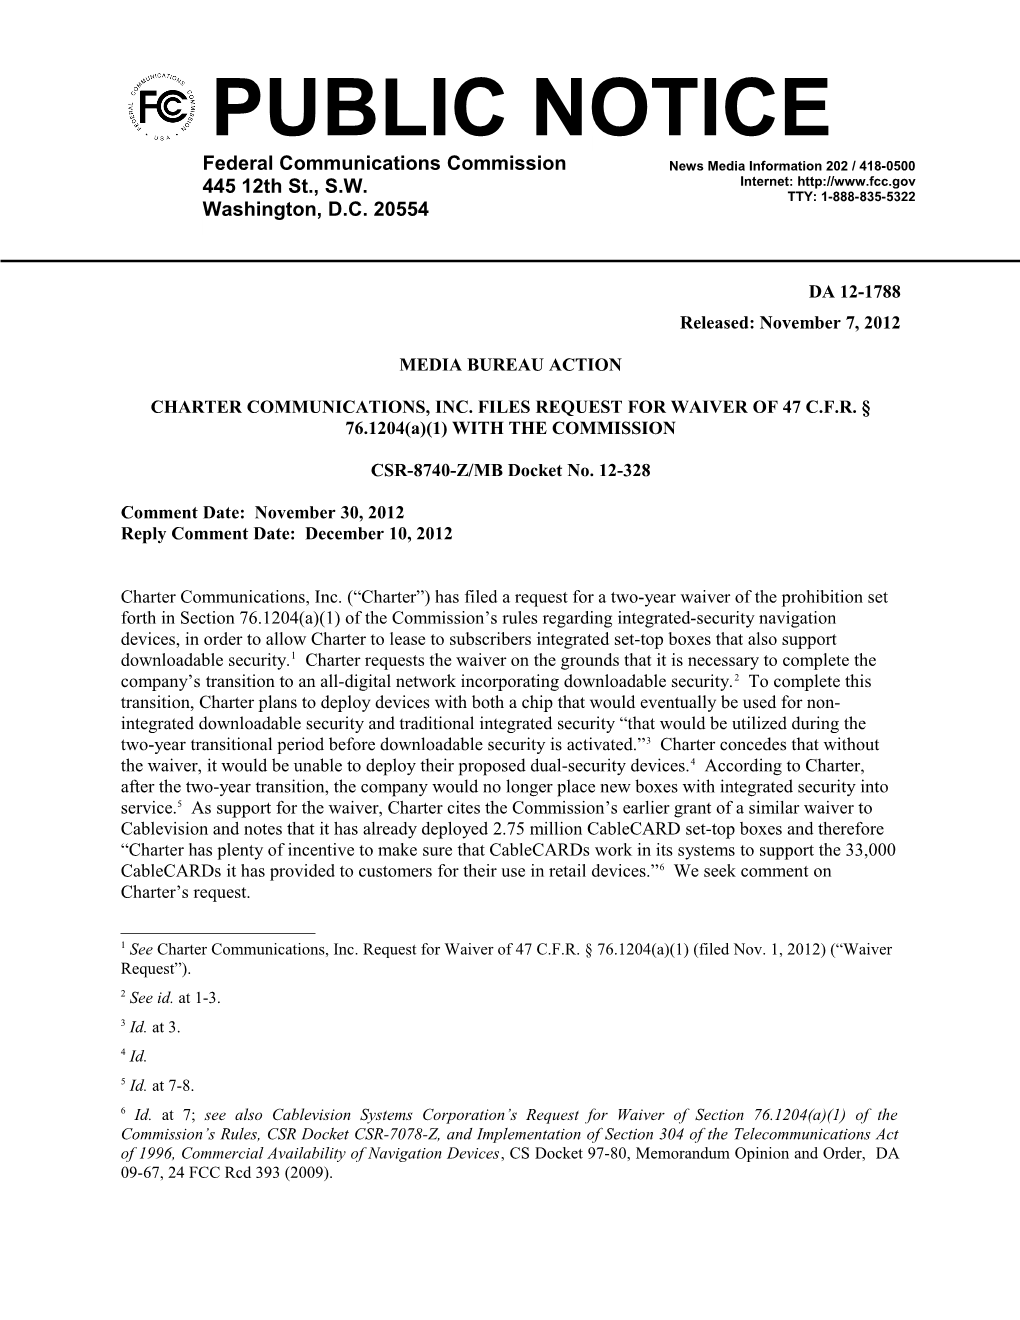 CHARTER COMMUNICATIONS, INC. FILES REQUEST for WAIVER of 47 C.F.R. 76.1204(A)(1) WITH